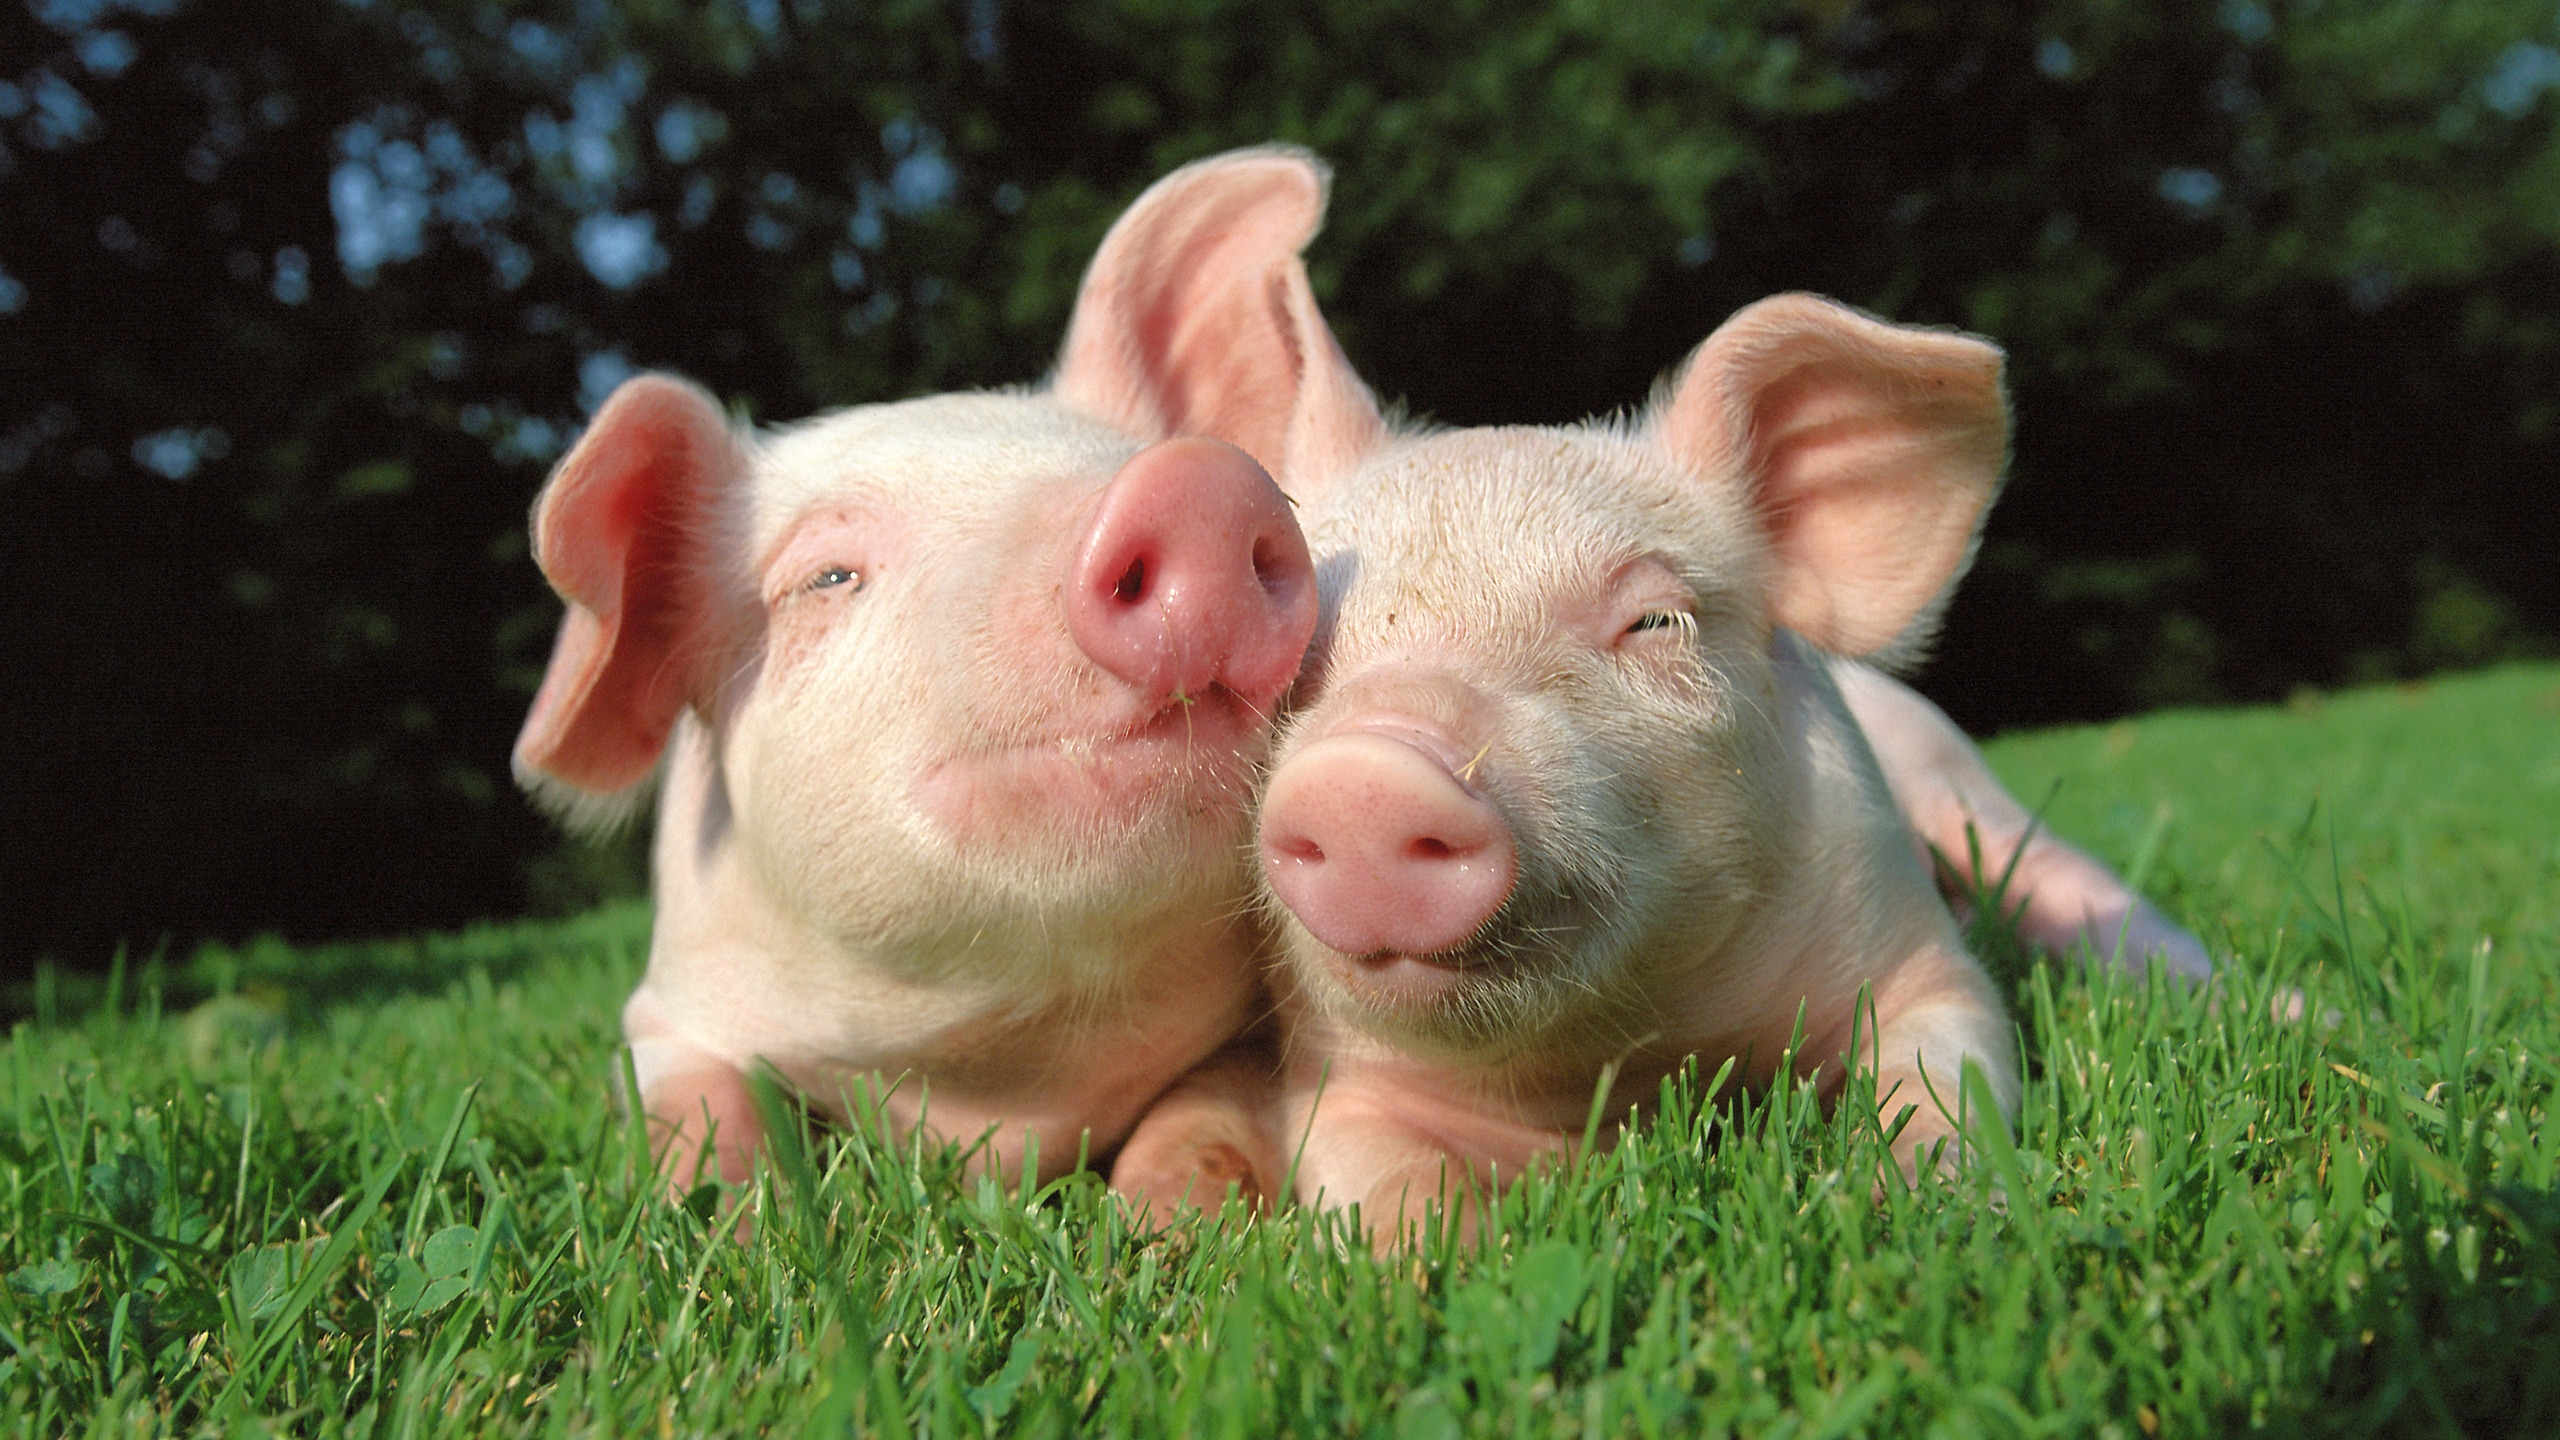 Pigs in Love for 2560x1440 HDTV resolution